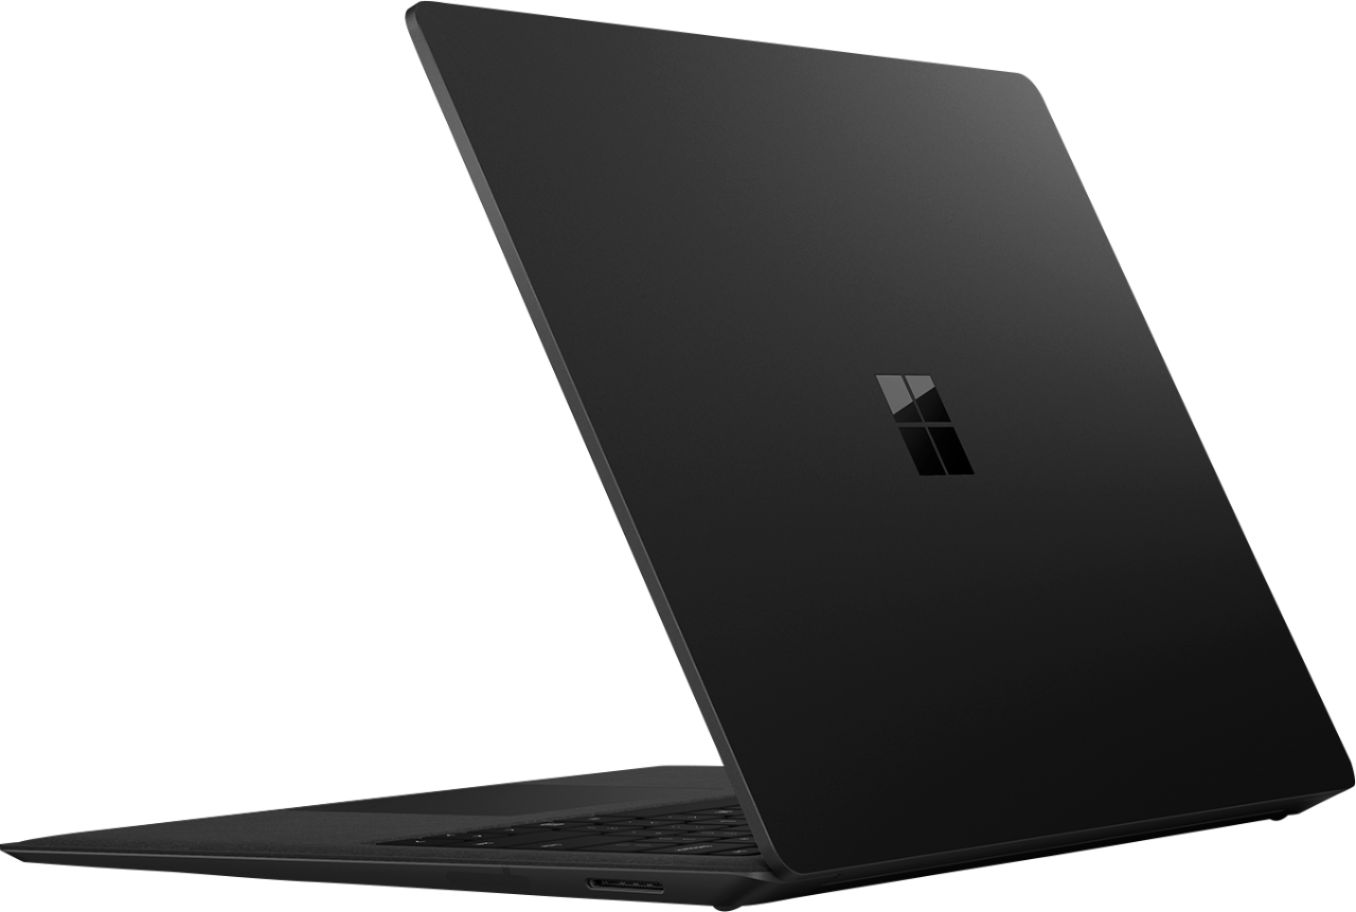 PC/タブレット ノートPC Best Buy: Microsoft Surface Laptop 2 13.5